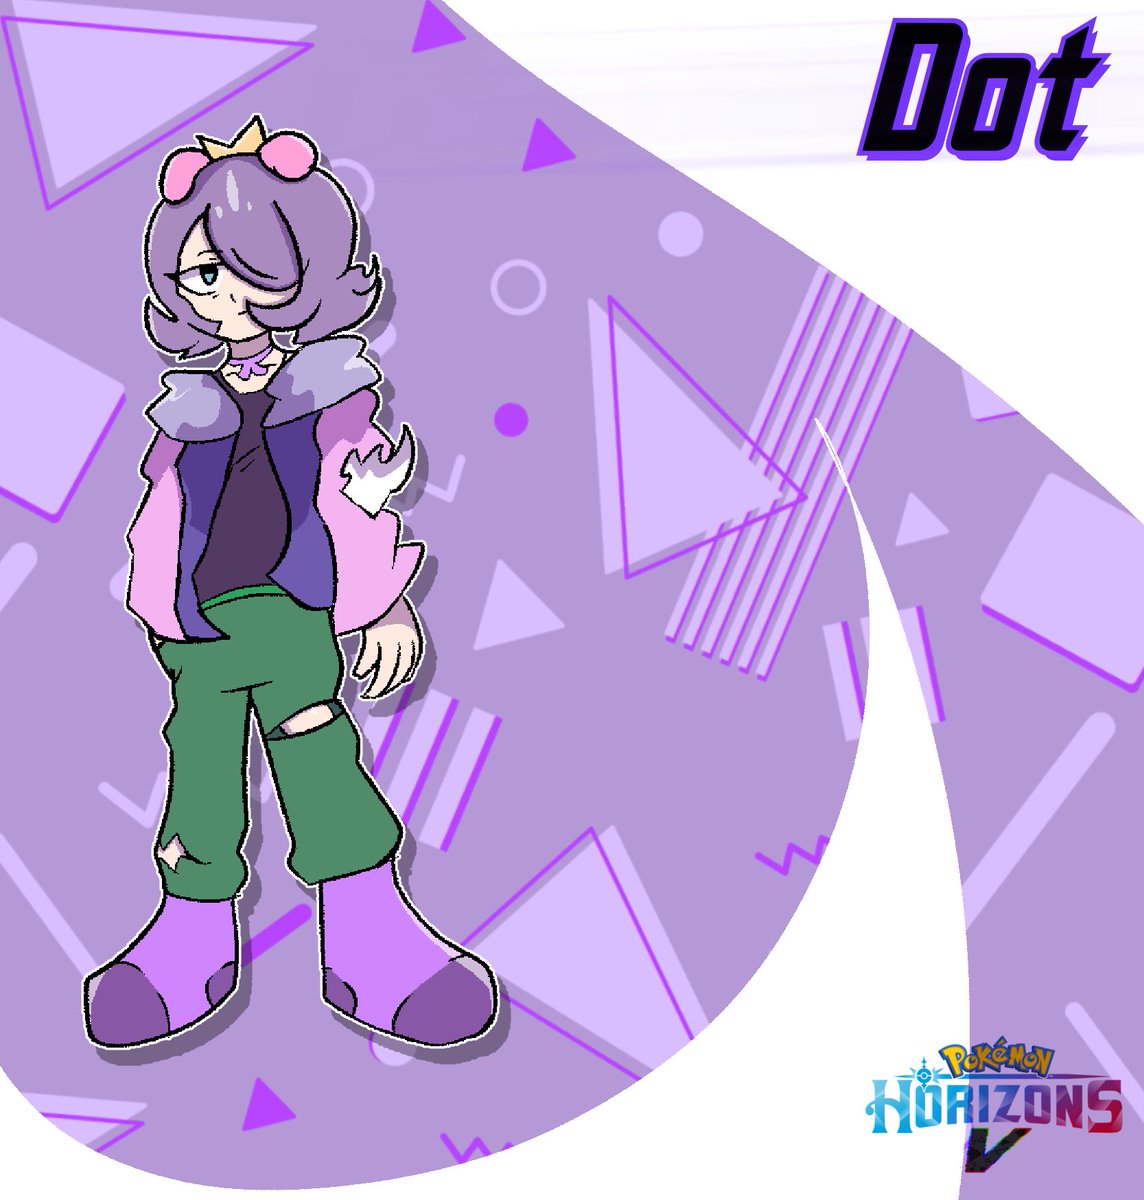 Here’s V!Dot! I had a lot of fun designing her.

More about her character in the thread 🧵 

#Anipoke #PokemonAU